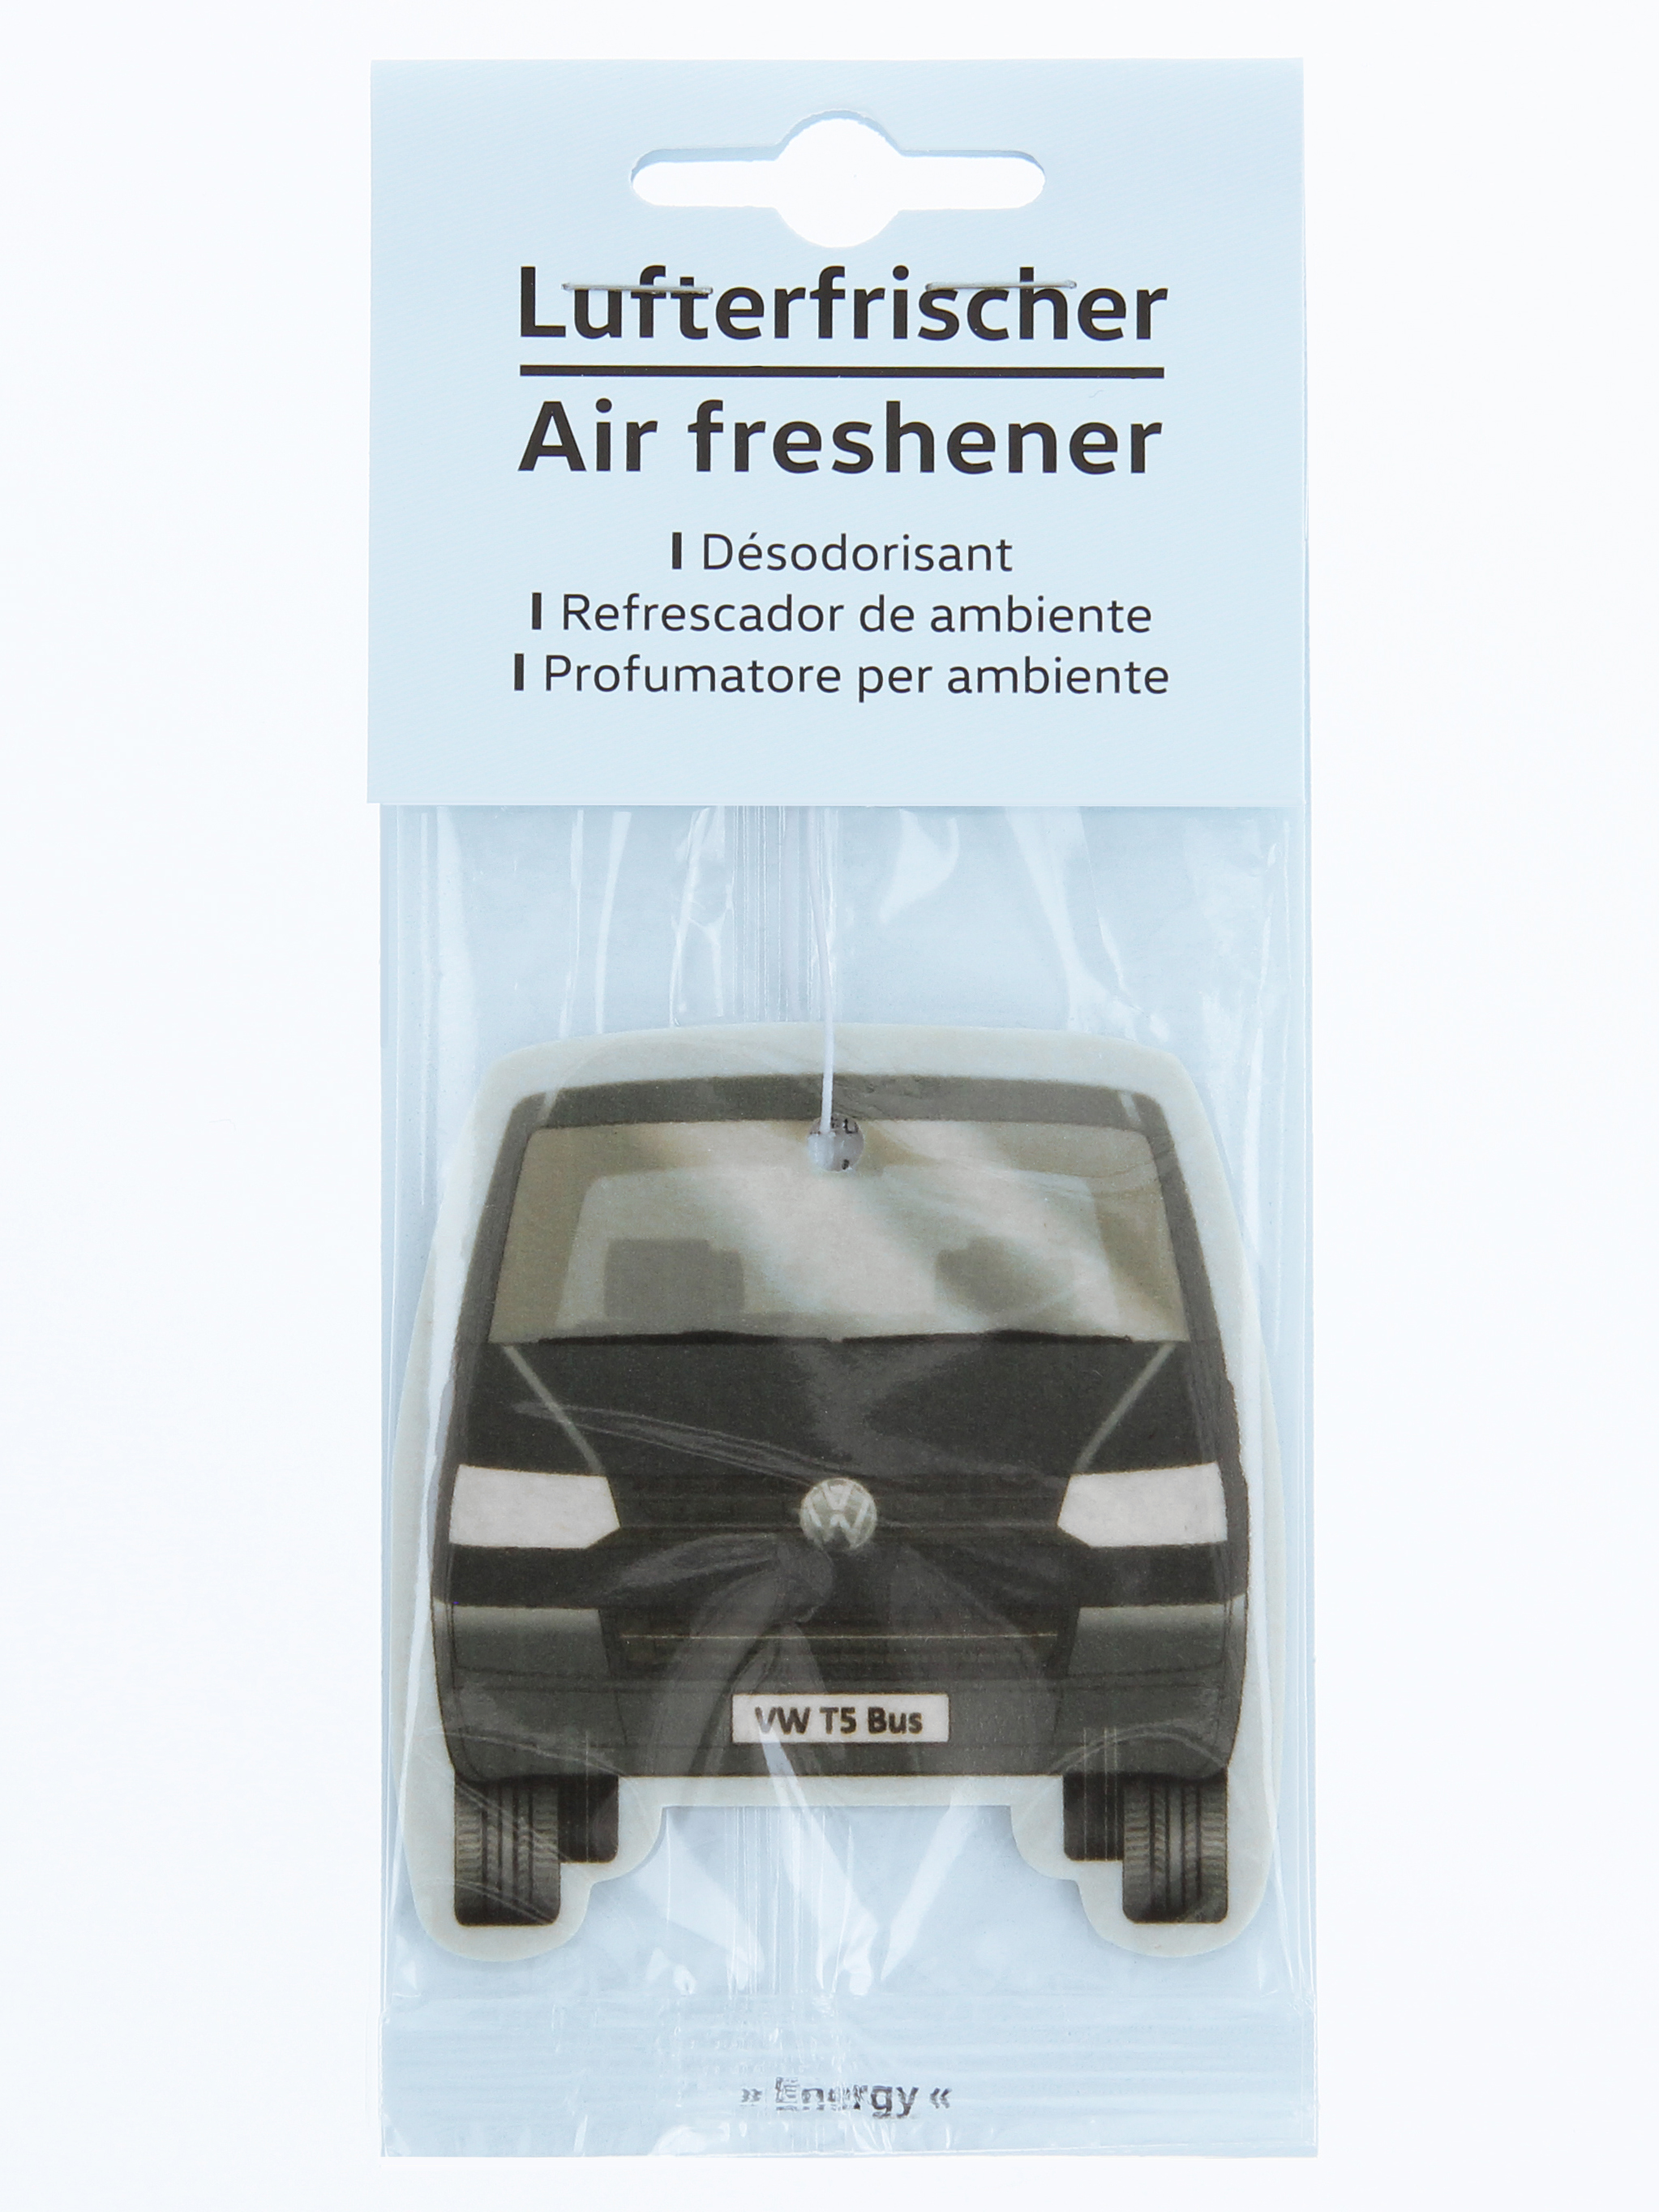 VW T5/T6 Bus Front Air Freshener 